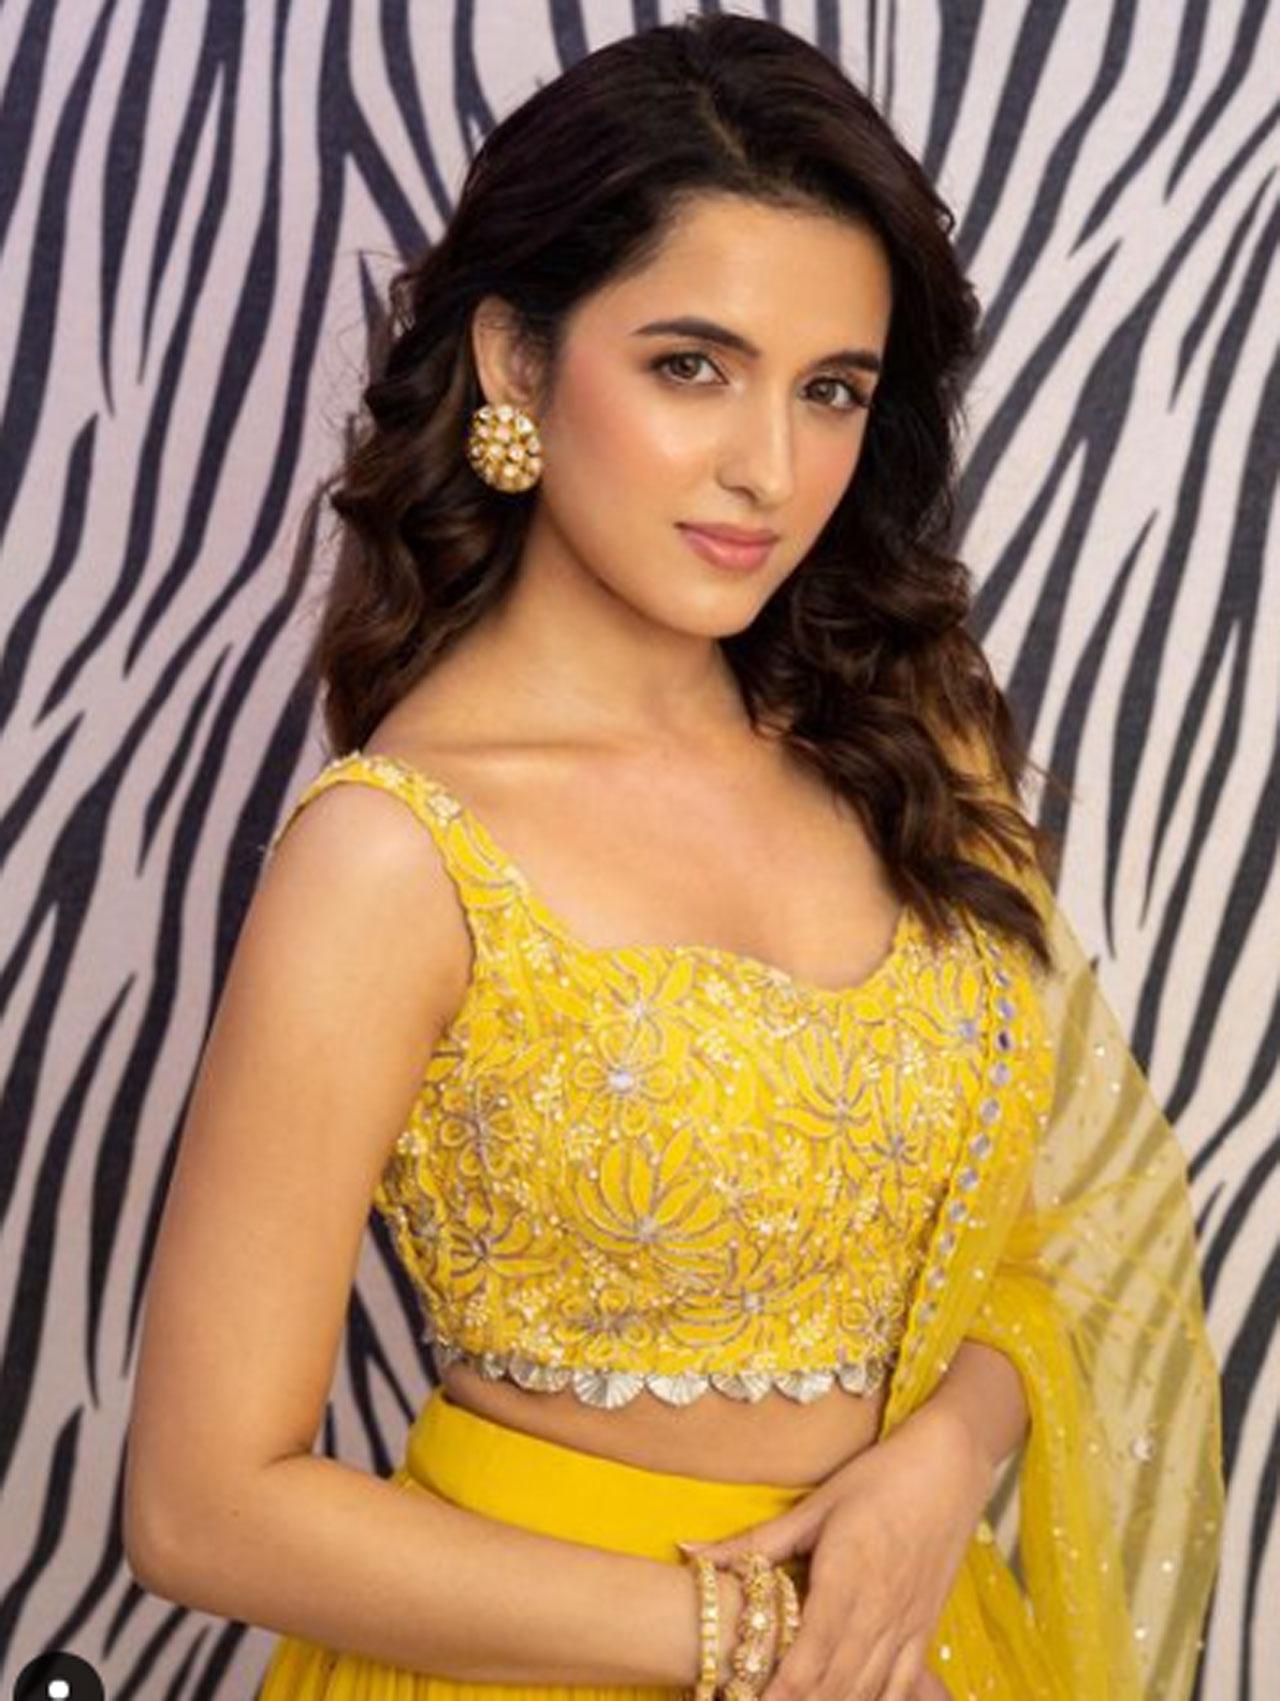 A golden, shimmery lehenga makes Shirley Setia look absolutely stunning and sensual. While she has already featured in the Netflix feature Maska, the Abhimanyu Dassani and Shilpa Shetty Kundra-starrer would be her first theatrical release